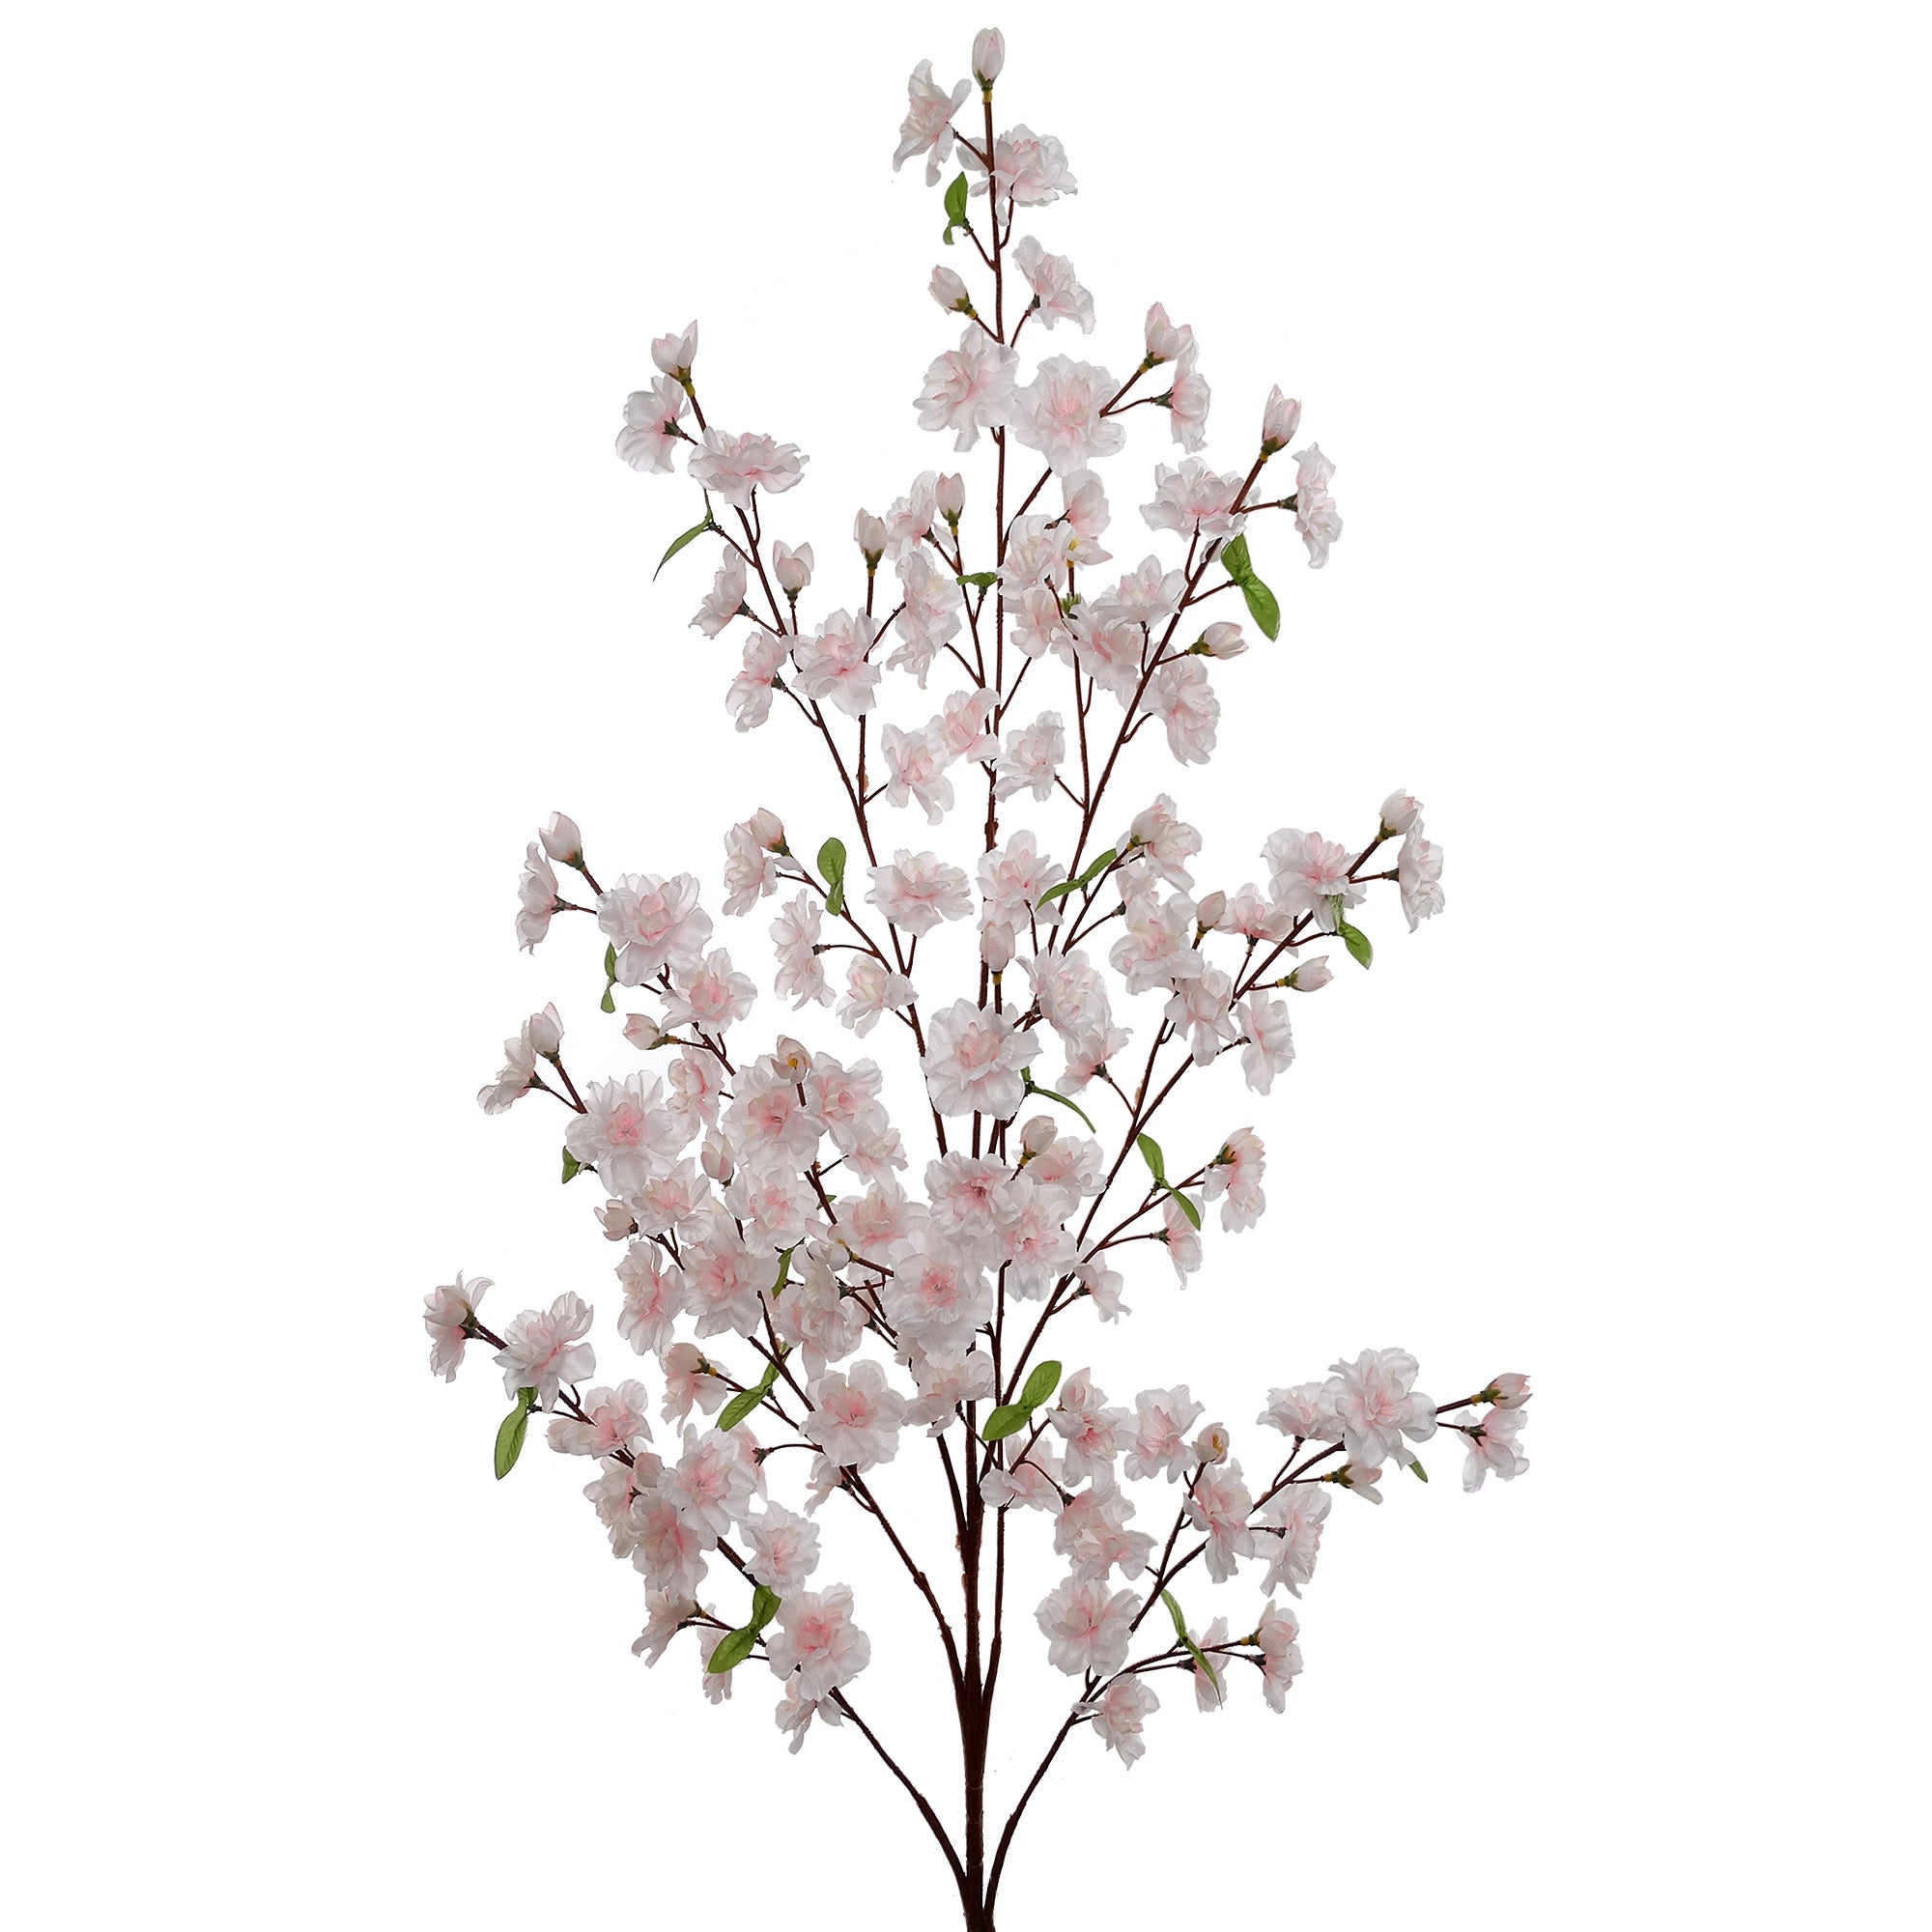 52"" Pink Cherry Blossom Spray - Stunning Artificial Branch for Home Decor, Wedding Centerpieces, and Floral Arrangements